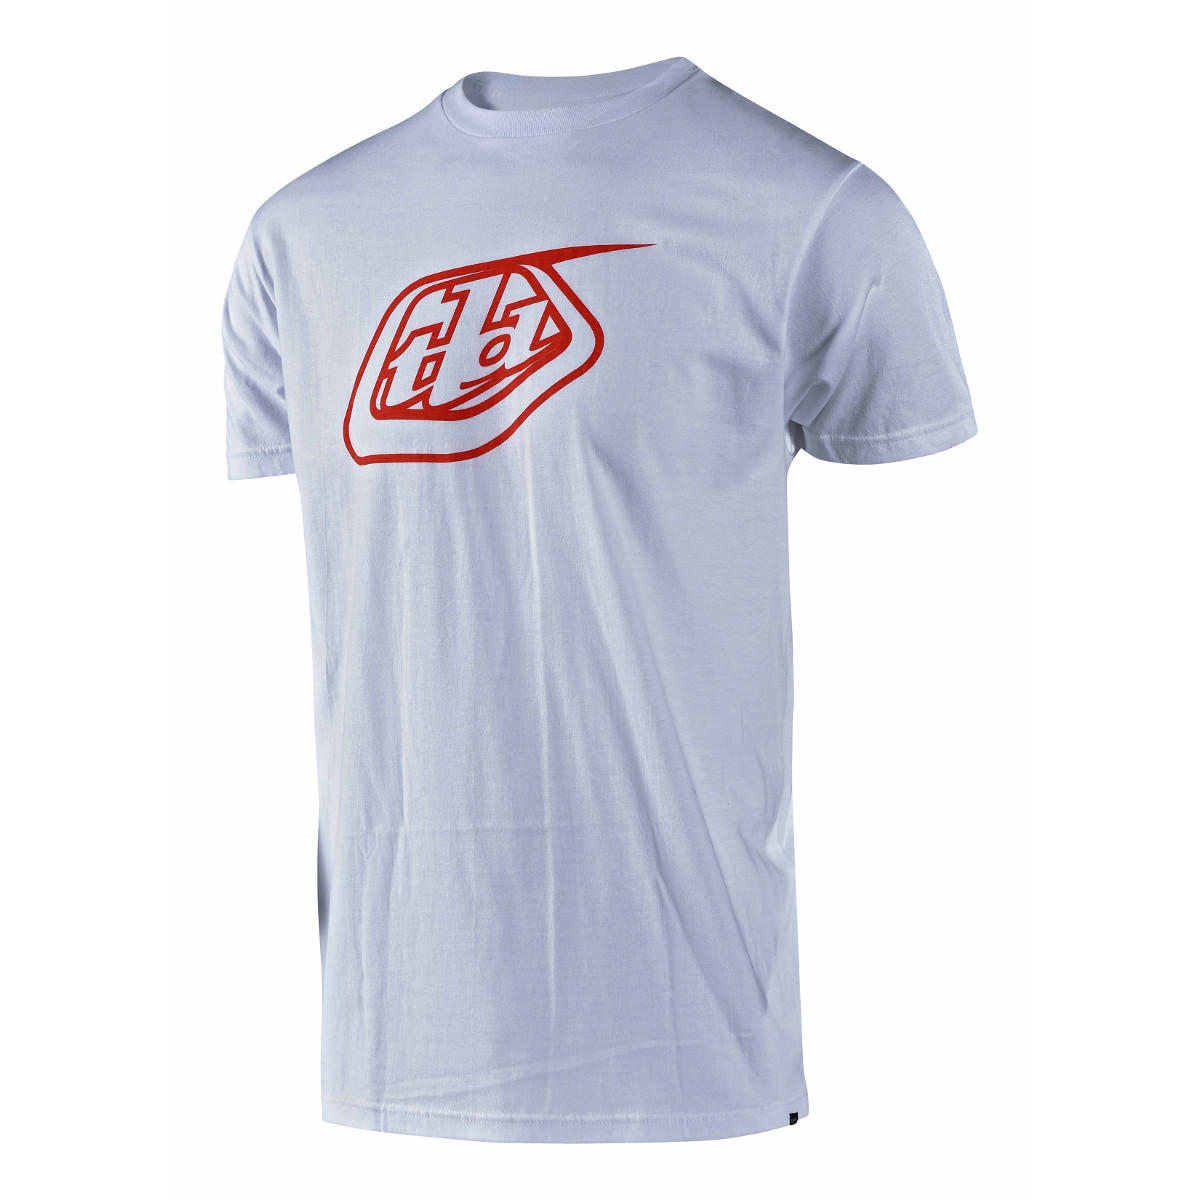 Troy Lee Designs T-Shirt Logo White/Red